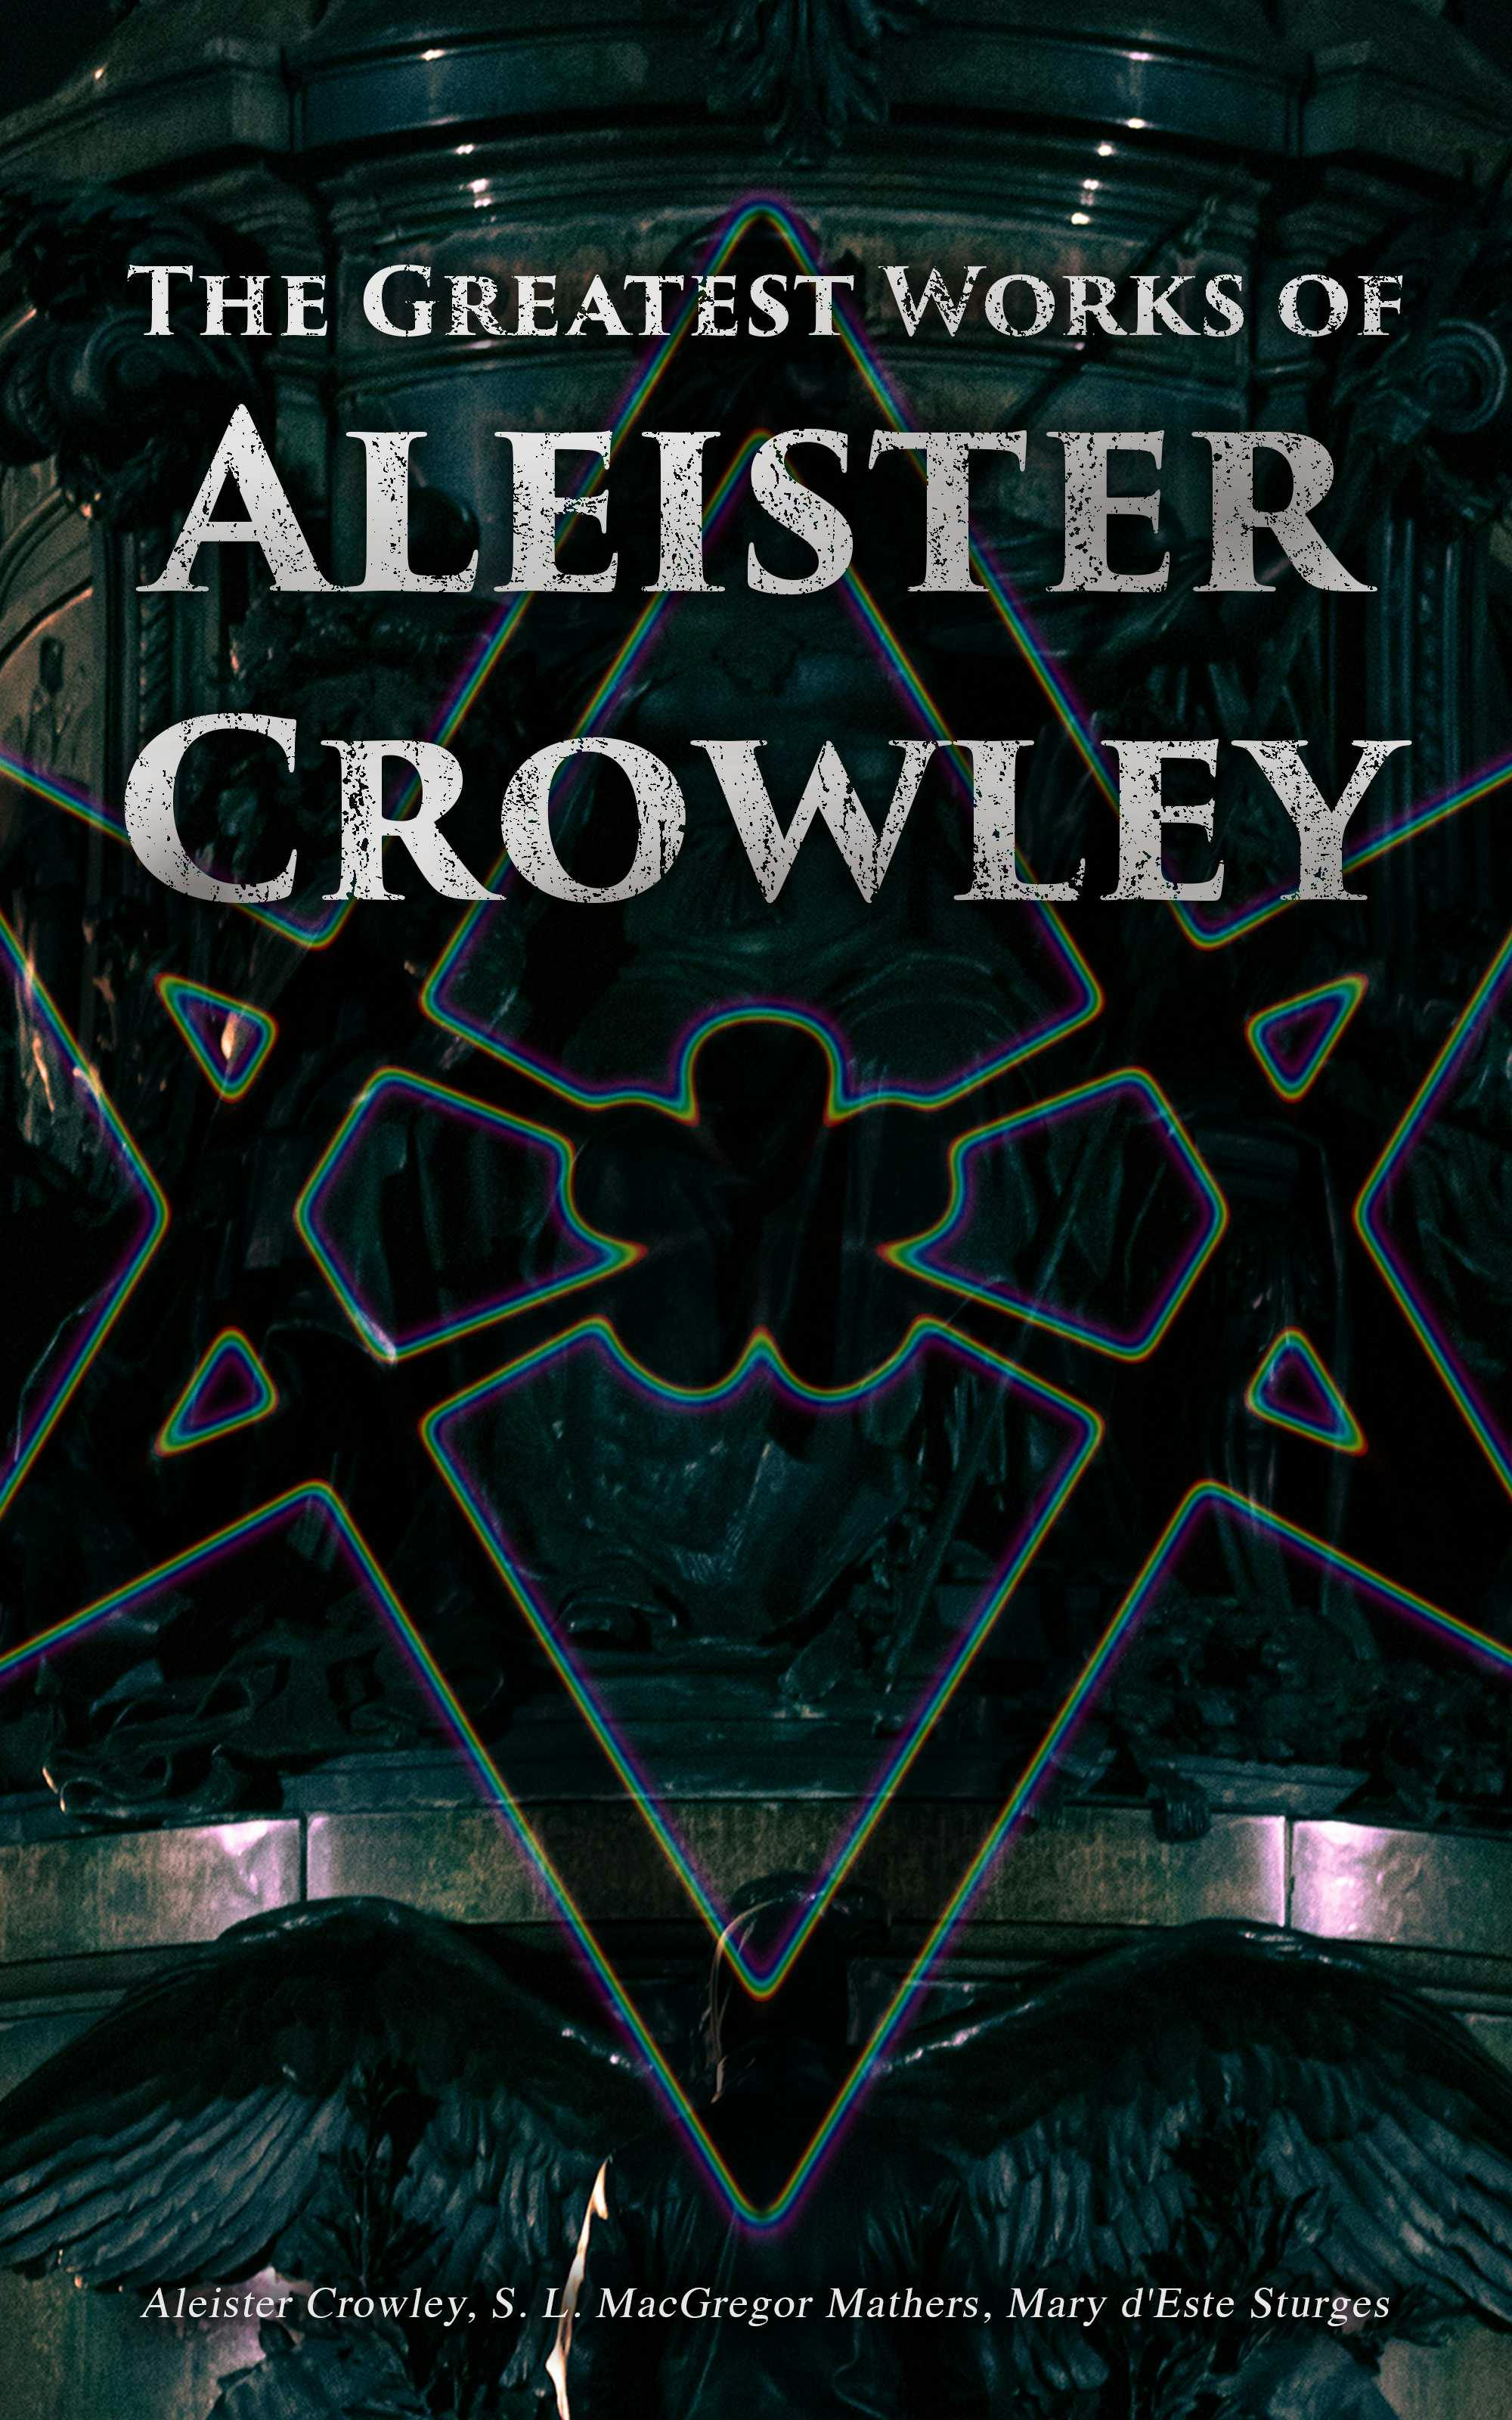 The Greatest Works of Aleister Crowley: Thelma Texts, The Book of the Law, Mysticism & Magick, The Lesser Key of Solomon - Mary d'Este Sturges, S. L. MacGregor Mathers, Aleister Crowley